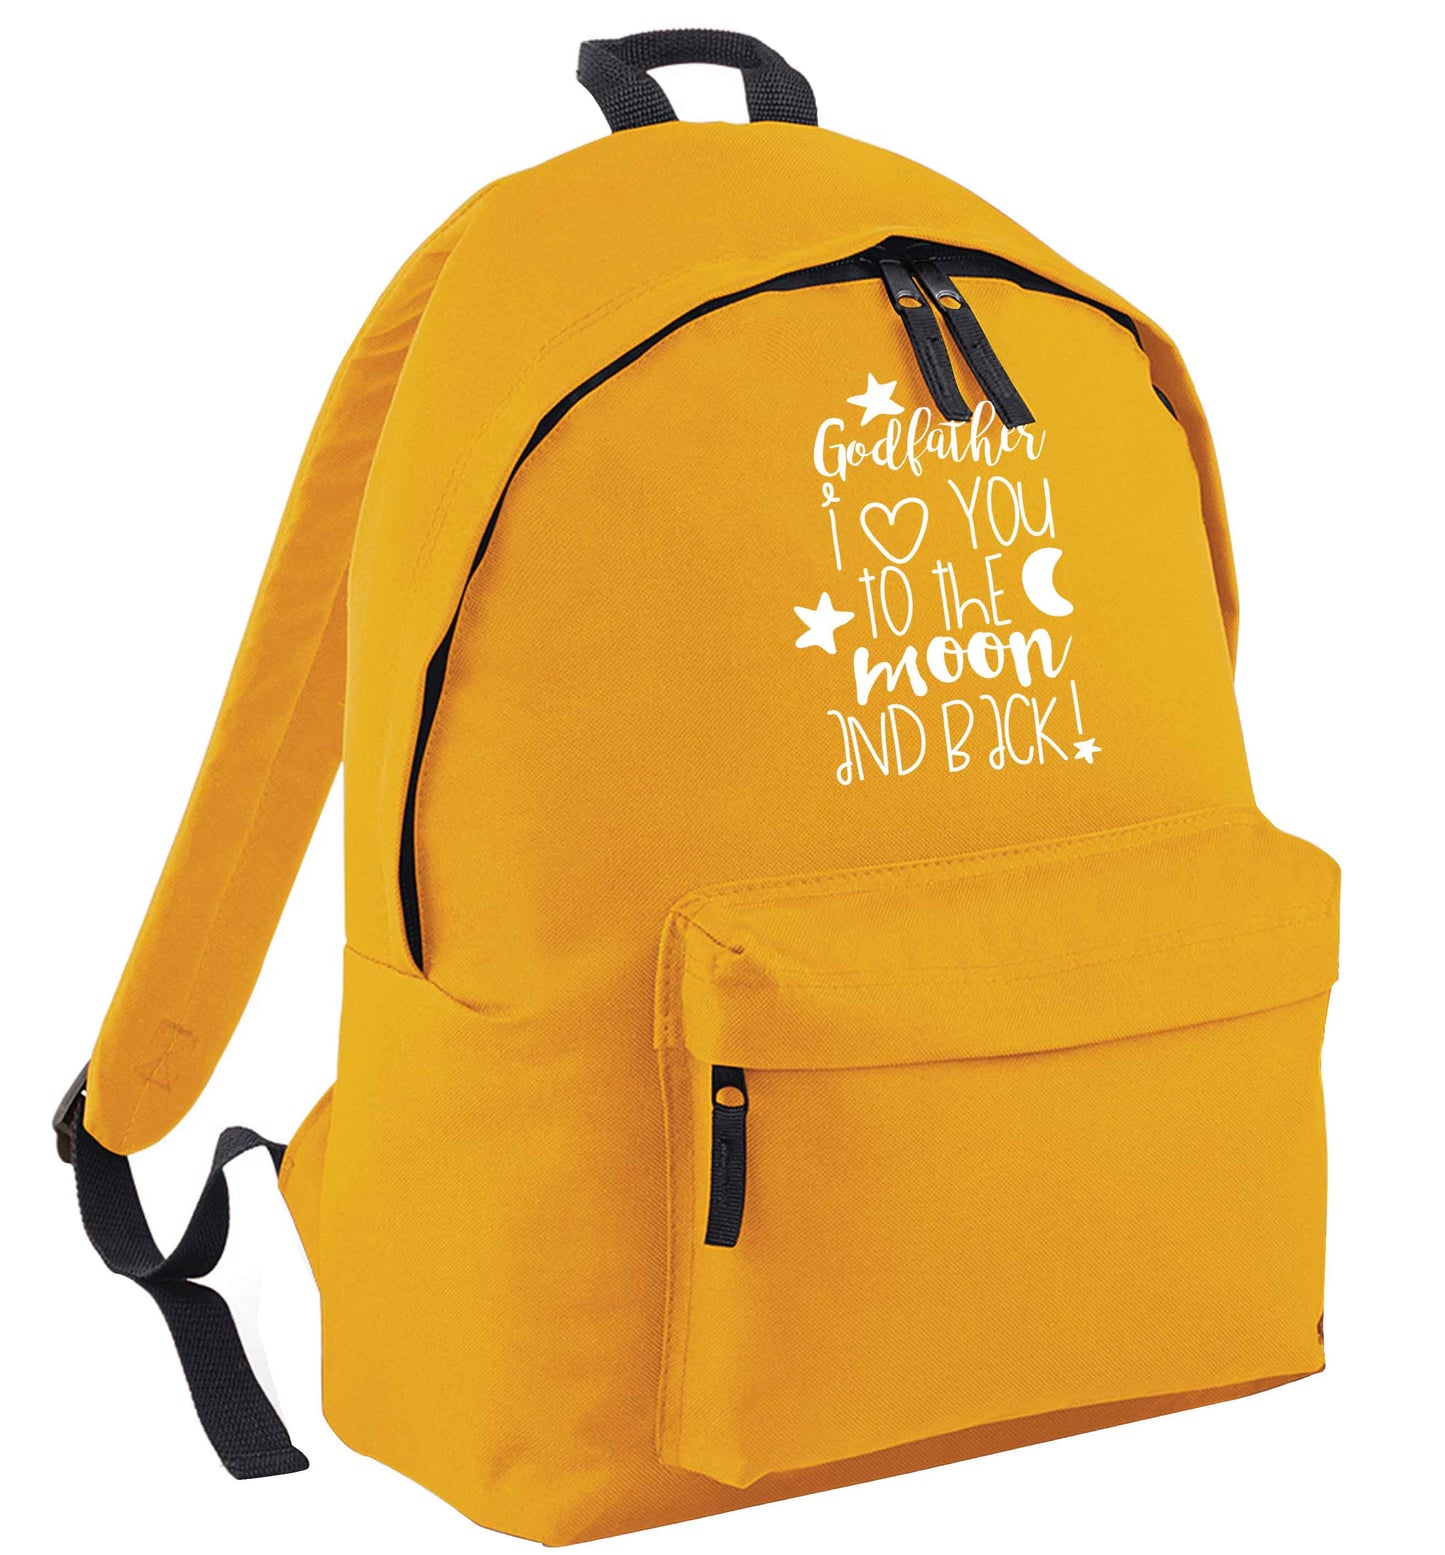 Godfather I love you to the moon and back mustard adults backpack